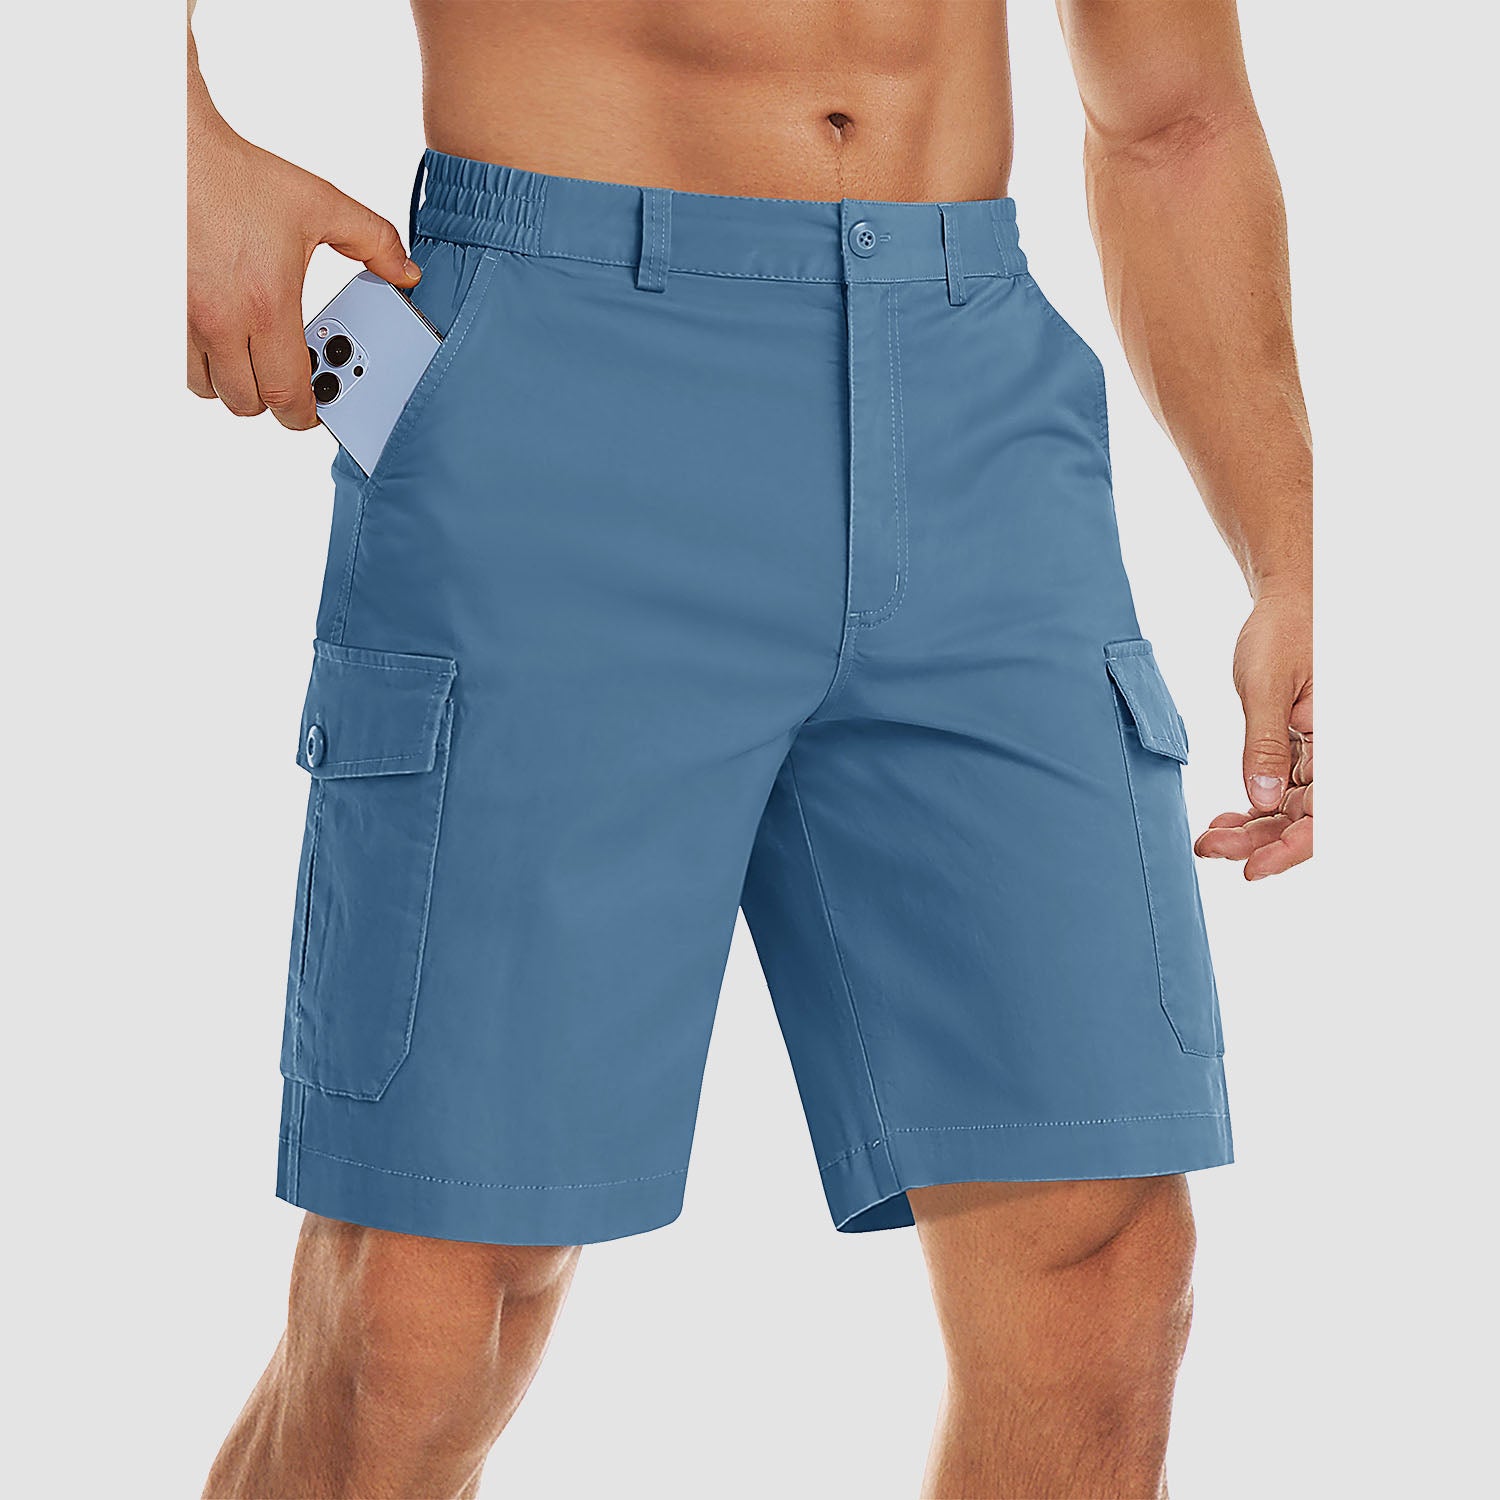 【Buy 4 Get the 4th Free!】Men's Cargo Shorts with Multi Pockets for Work Elastic Waist Casual Cotton Shorts